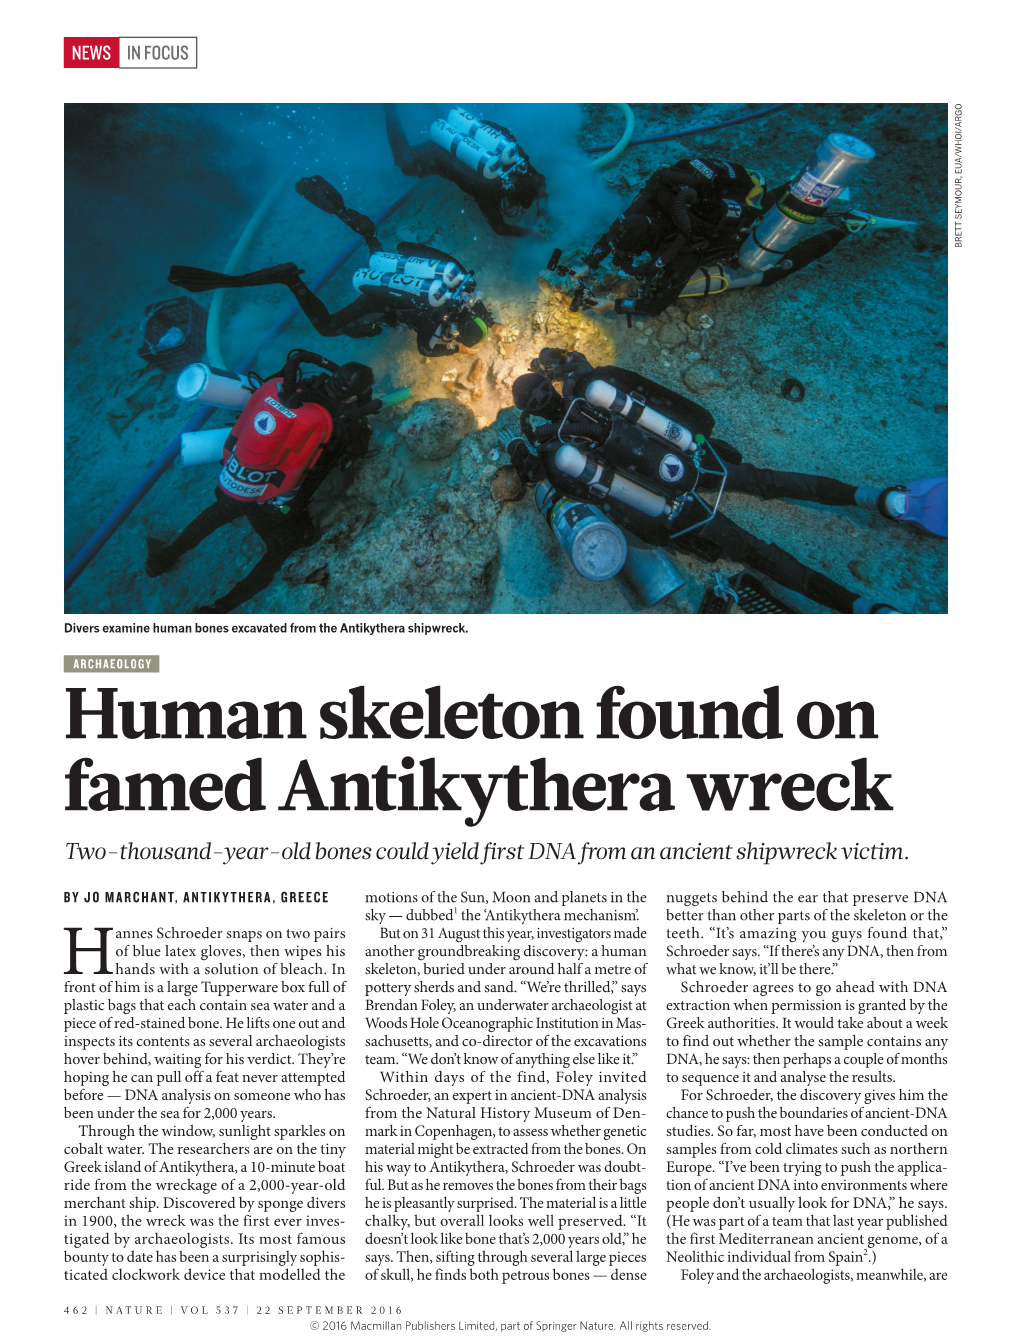 Human Skeleton Found on Famed Antikythera Wreck Two-Thousand-Year-Old Bones Could Yield First DNA from an Ancient Shipwreck Victim